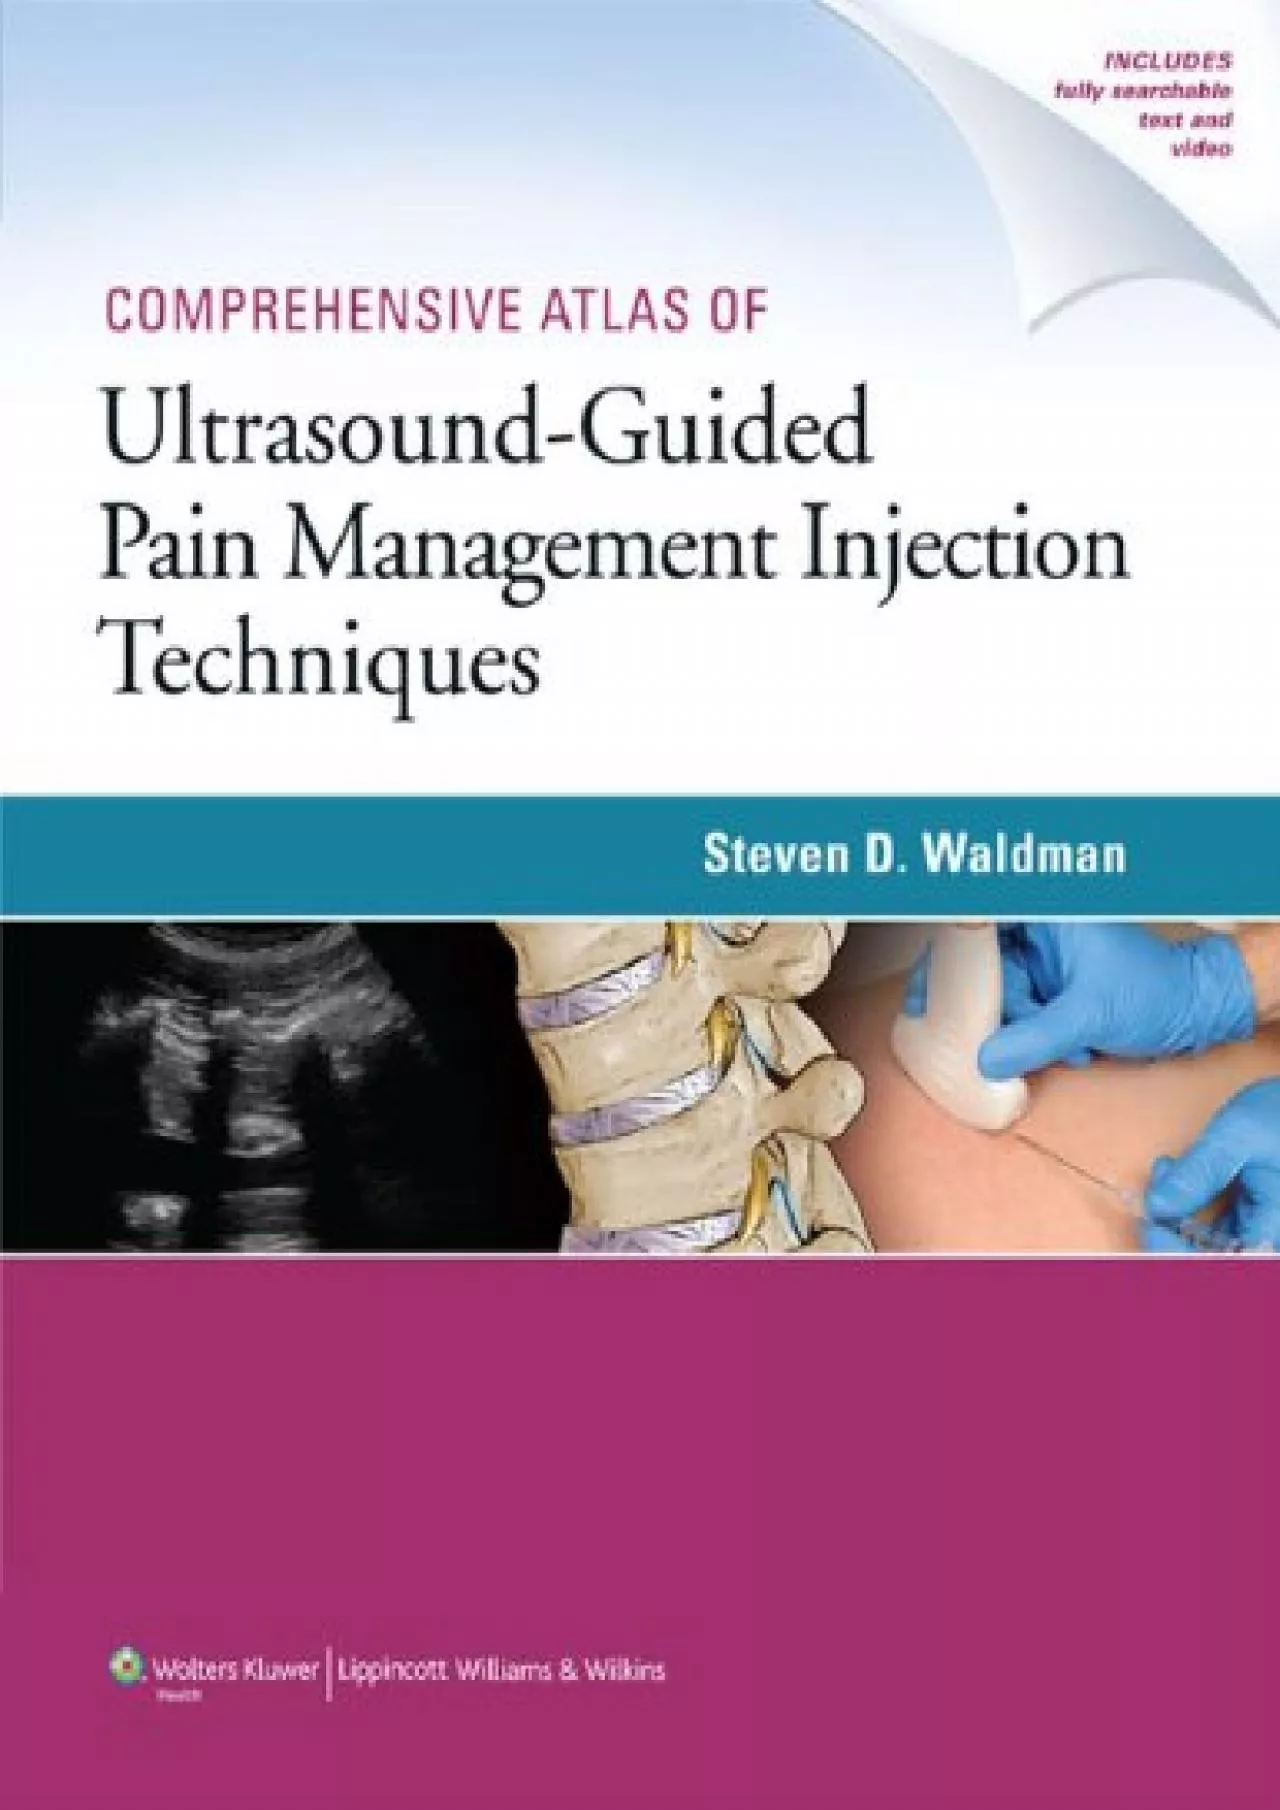 (BOOK)-Comprehensive Atlas Of Ultrasound-Guided Pain Management Injection Techniques